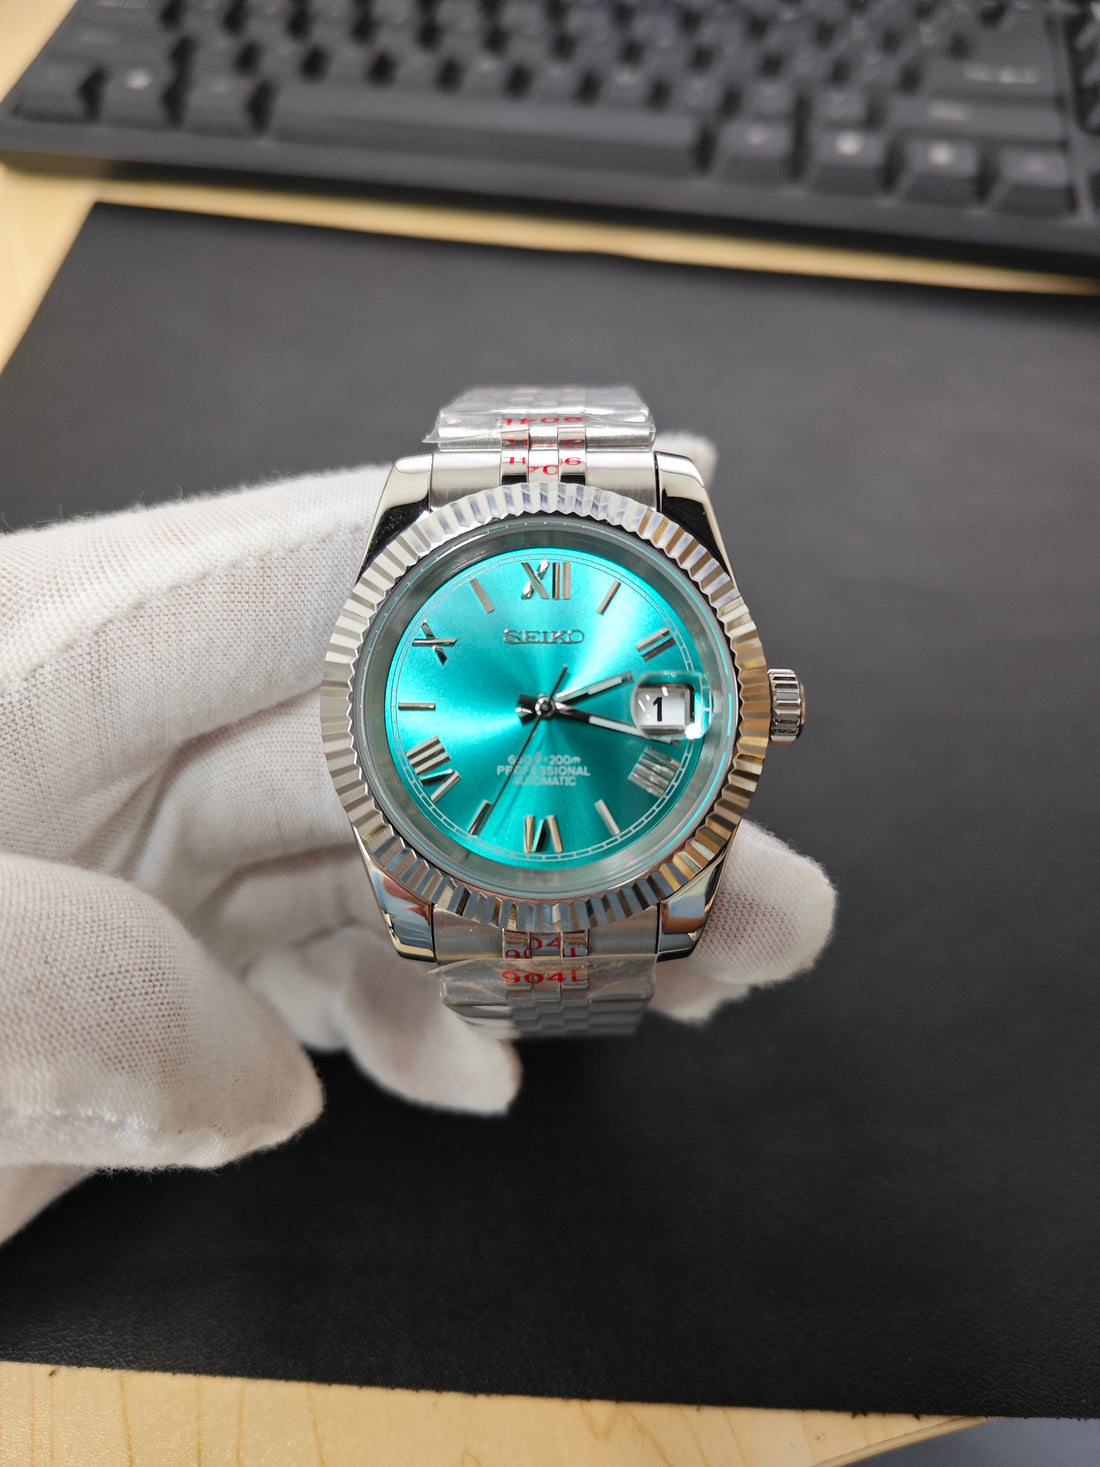 Teal Dial Date Just - Fluted Bezel- Roman Numeral- Jubilee Bracelet - NH35 Automatic Movement